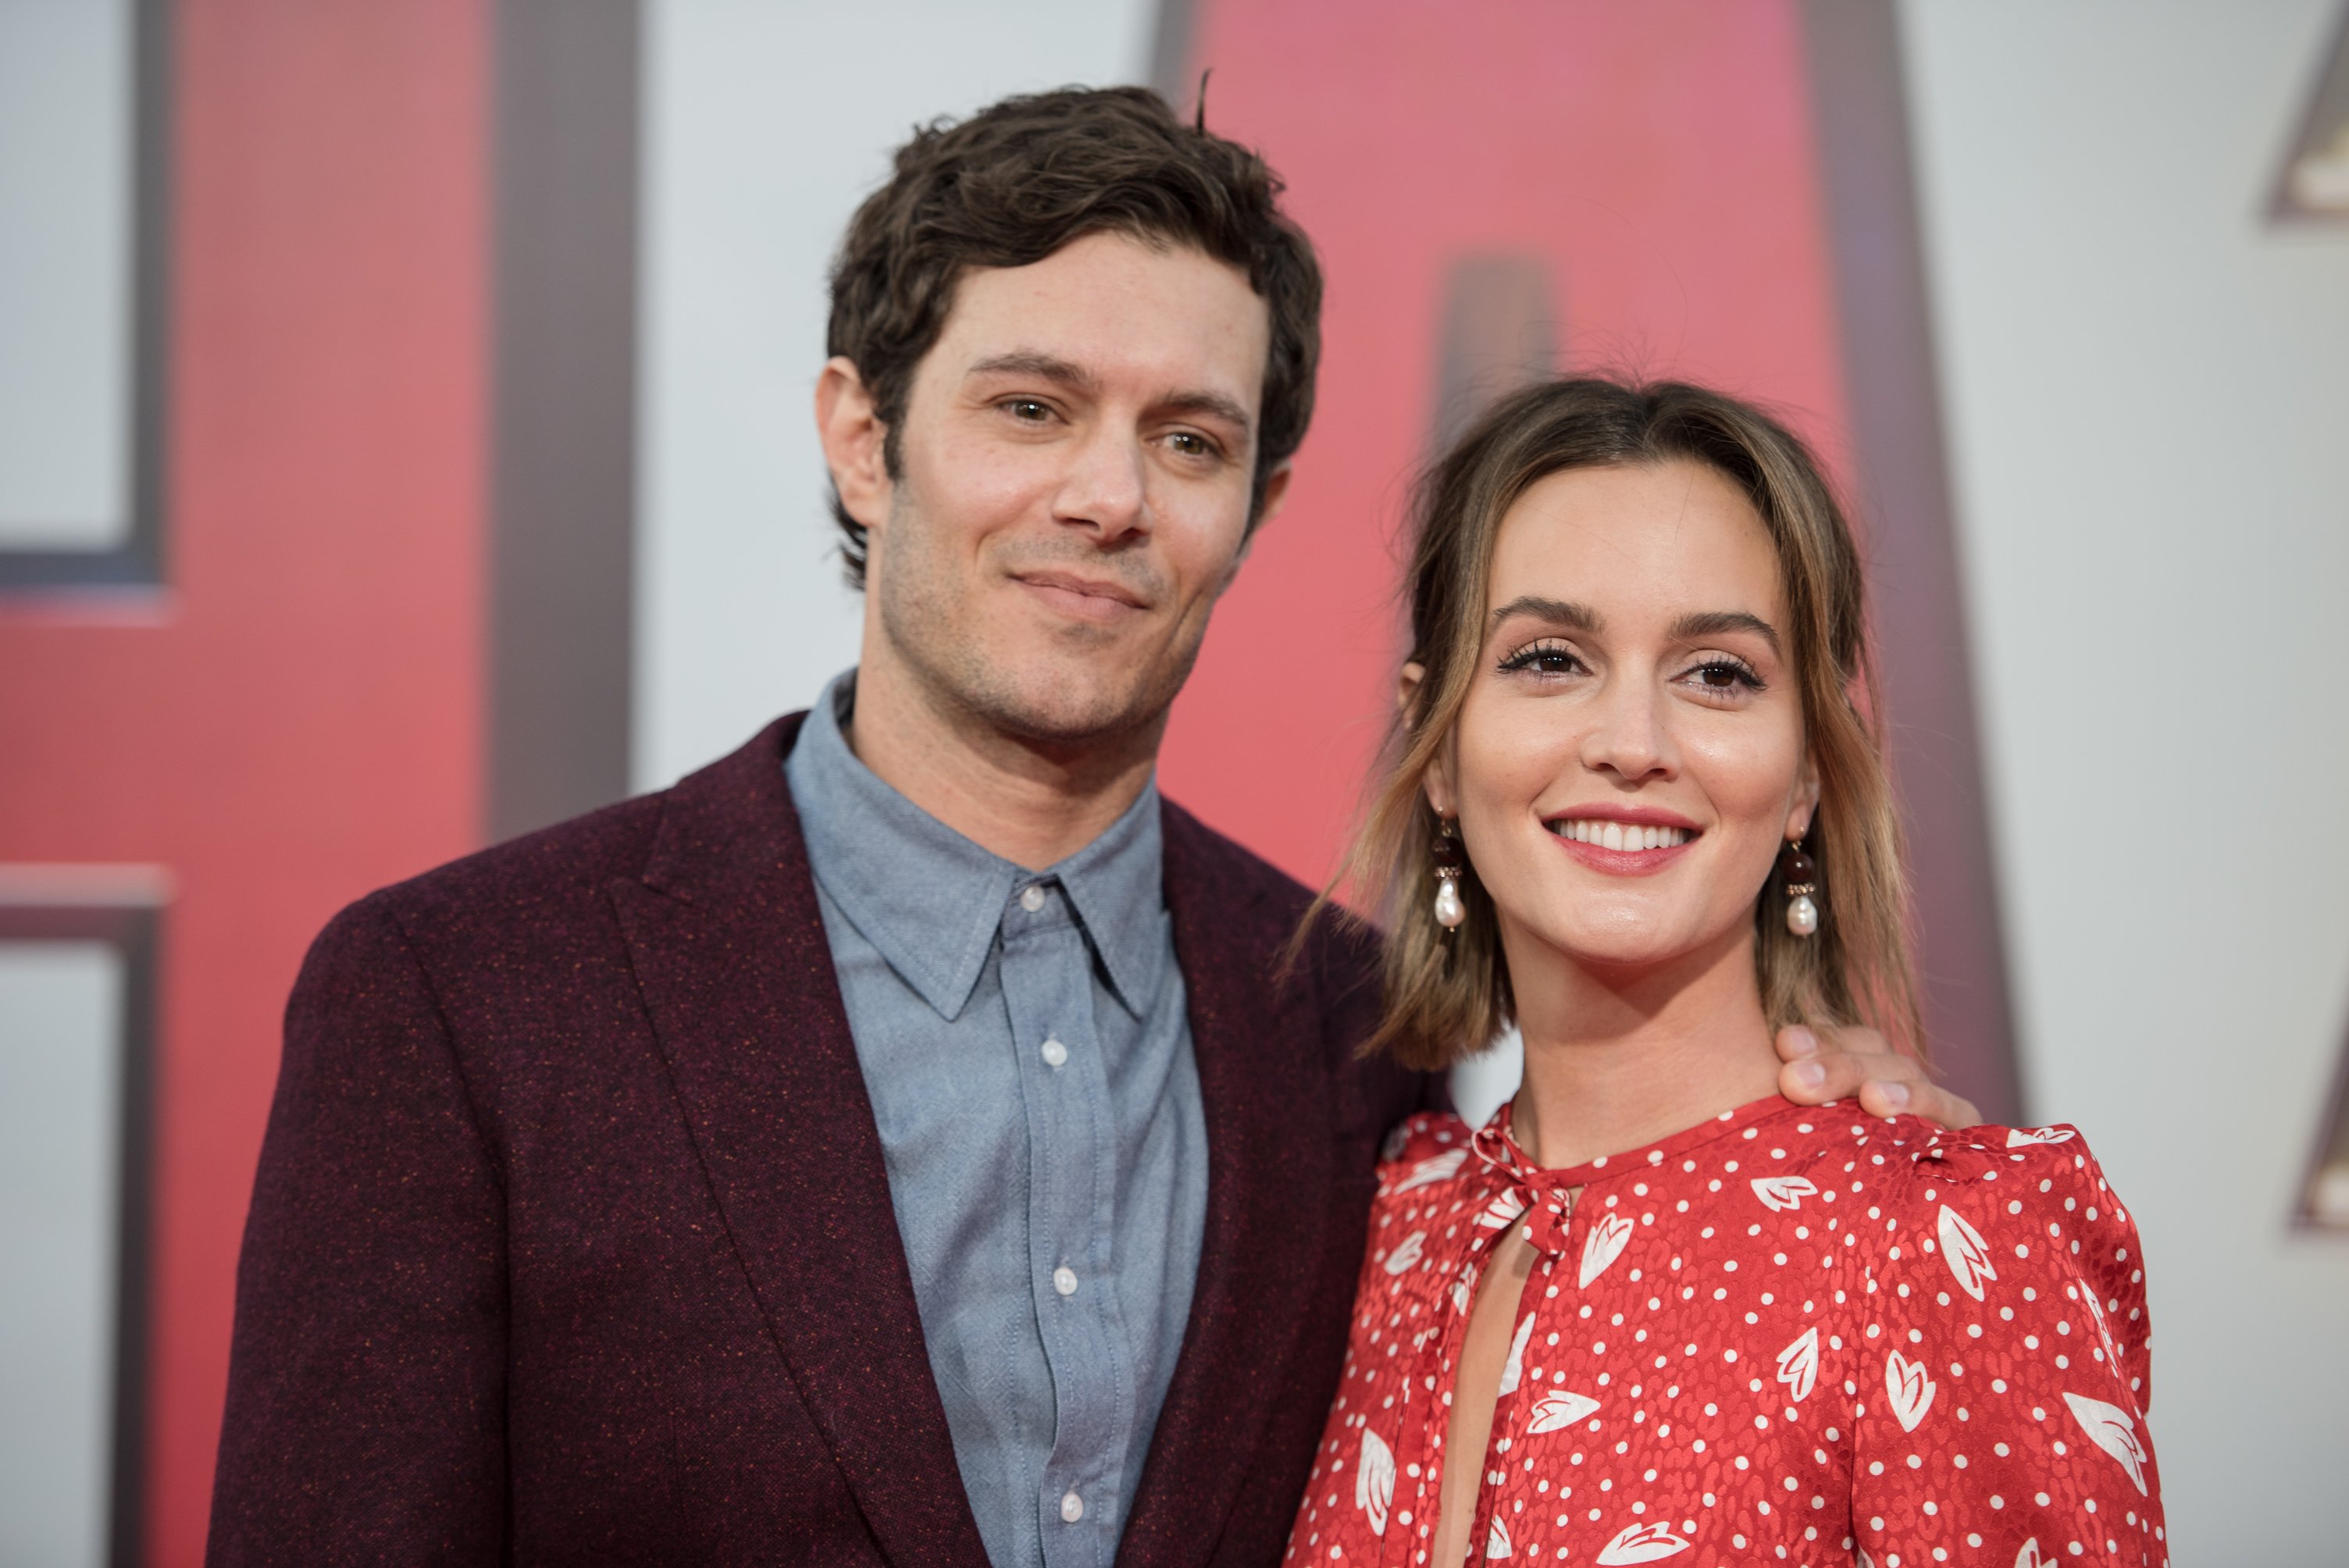 Adam Brody and Leighton Meester arrive at Warner Bros. Pictures and New Line Cinema's world premiere of "SHAZAM!" at TCL Chinese Theatre on March 28, 2019 in Hollywood, California. | Photo by Morgan Lieberman/FilmMagic/Getty Images